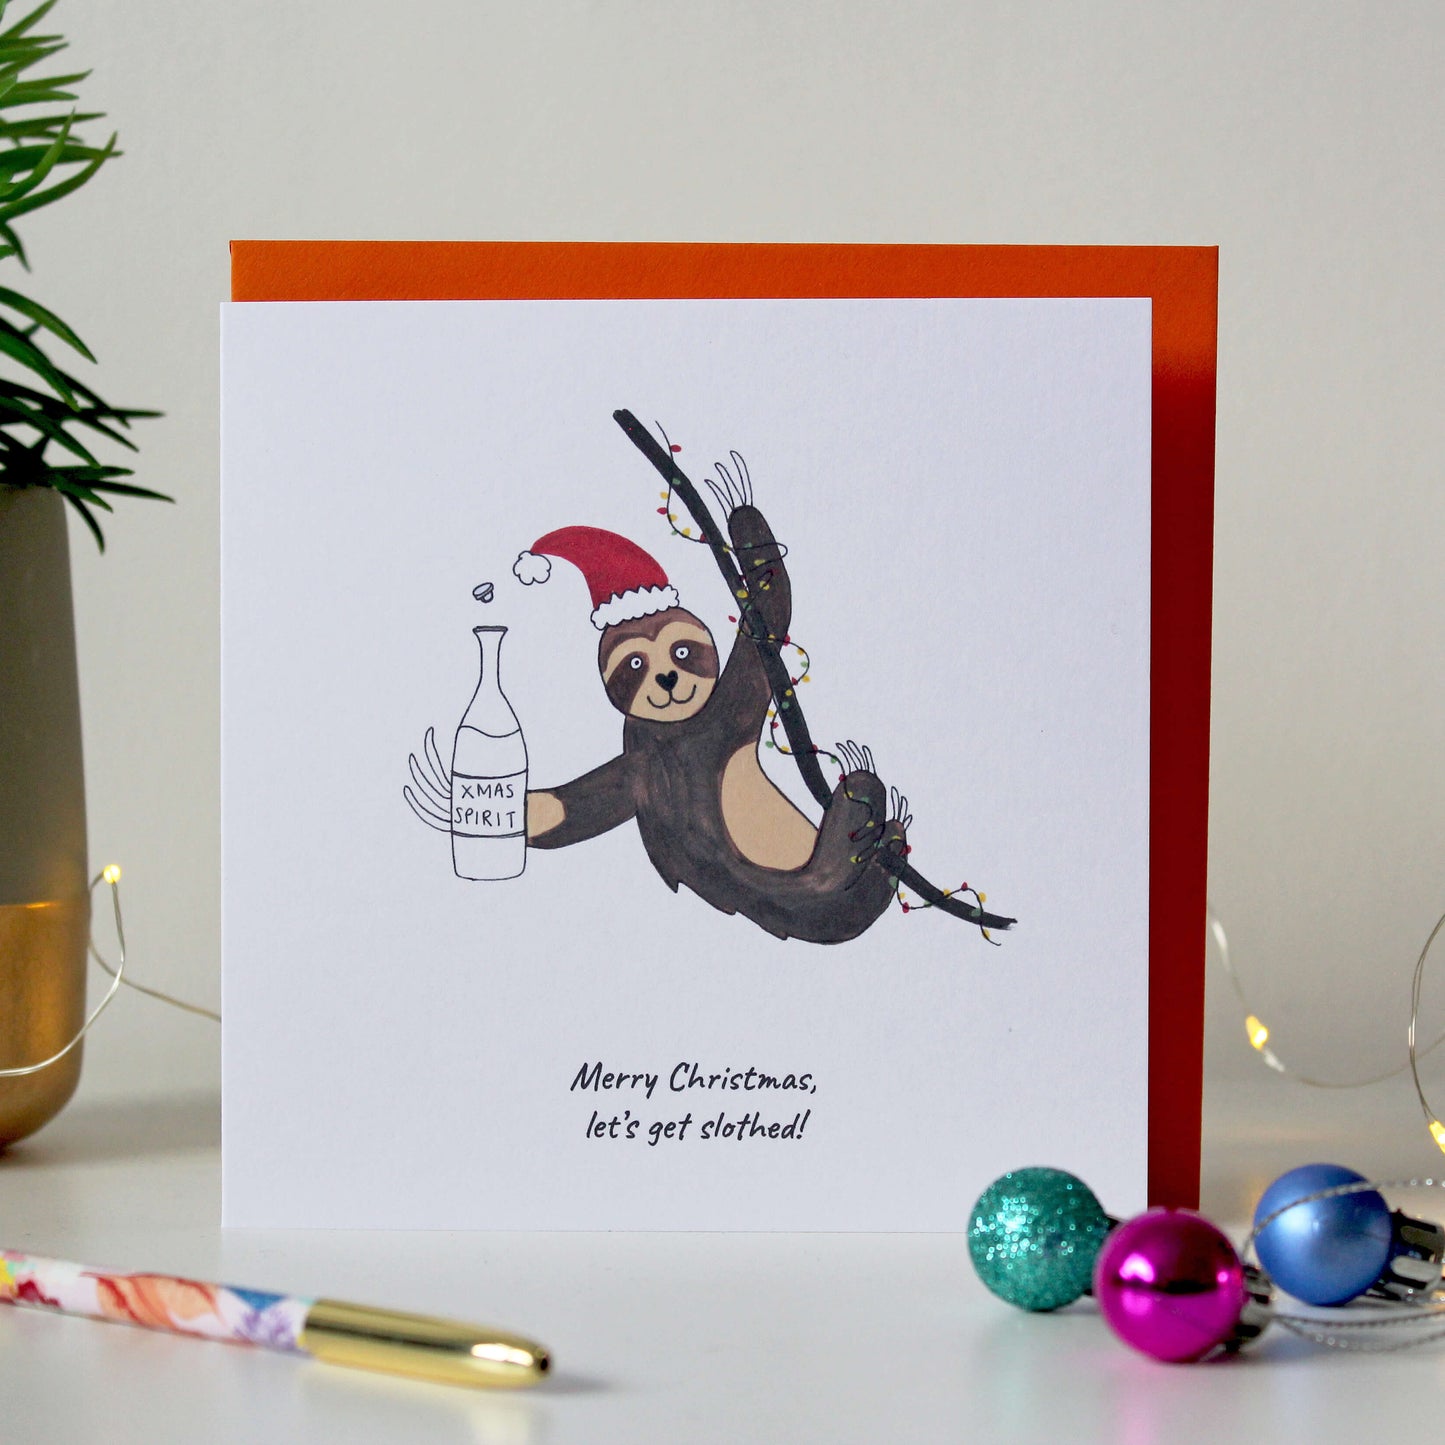 Funny Sloth Christmas card - 'Merry Christmas, Let's get slothed'